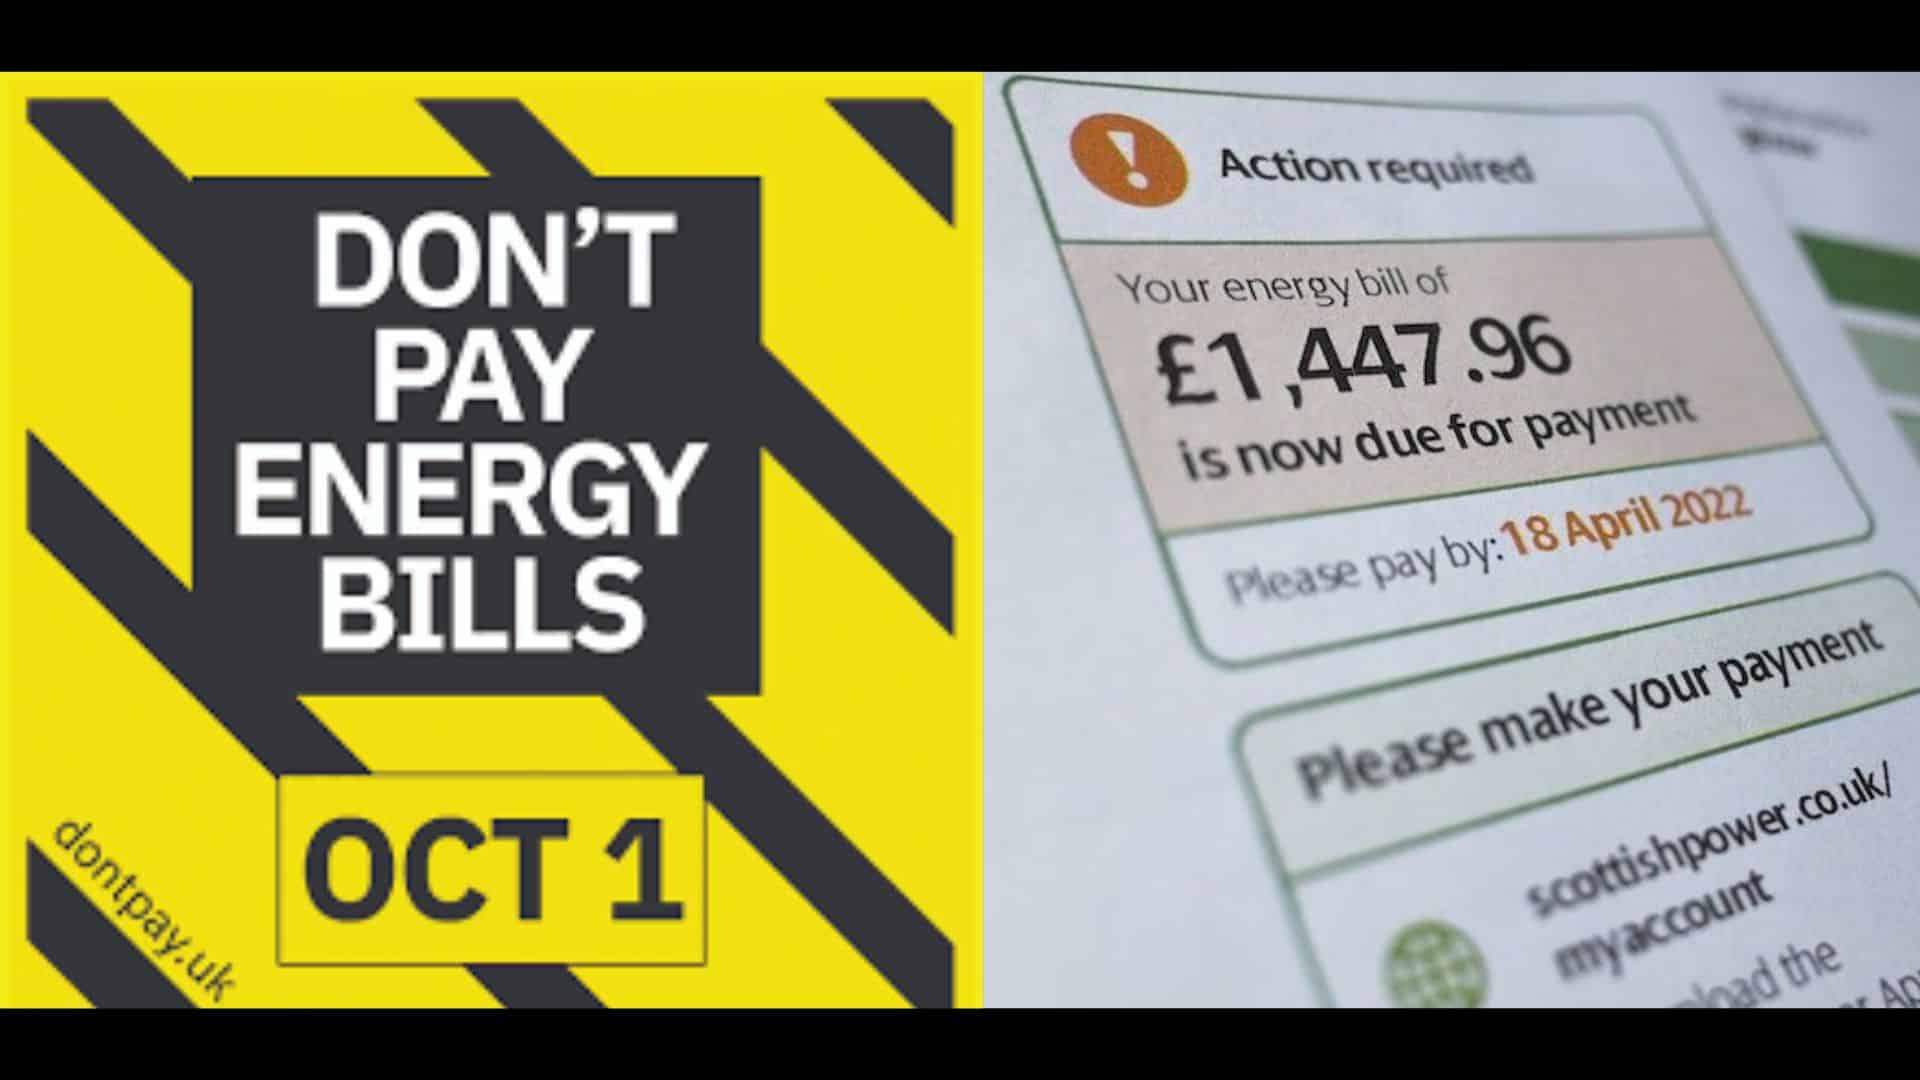 On the left, "Don't Pay UK" flyer. On the right, a picture of UK energy bills in £.